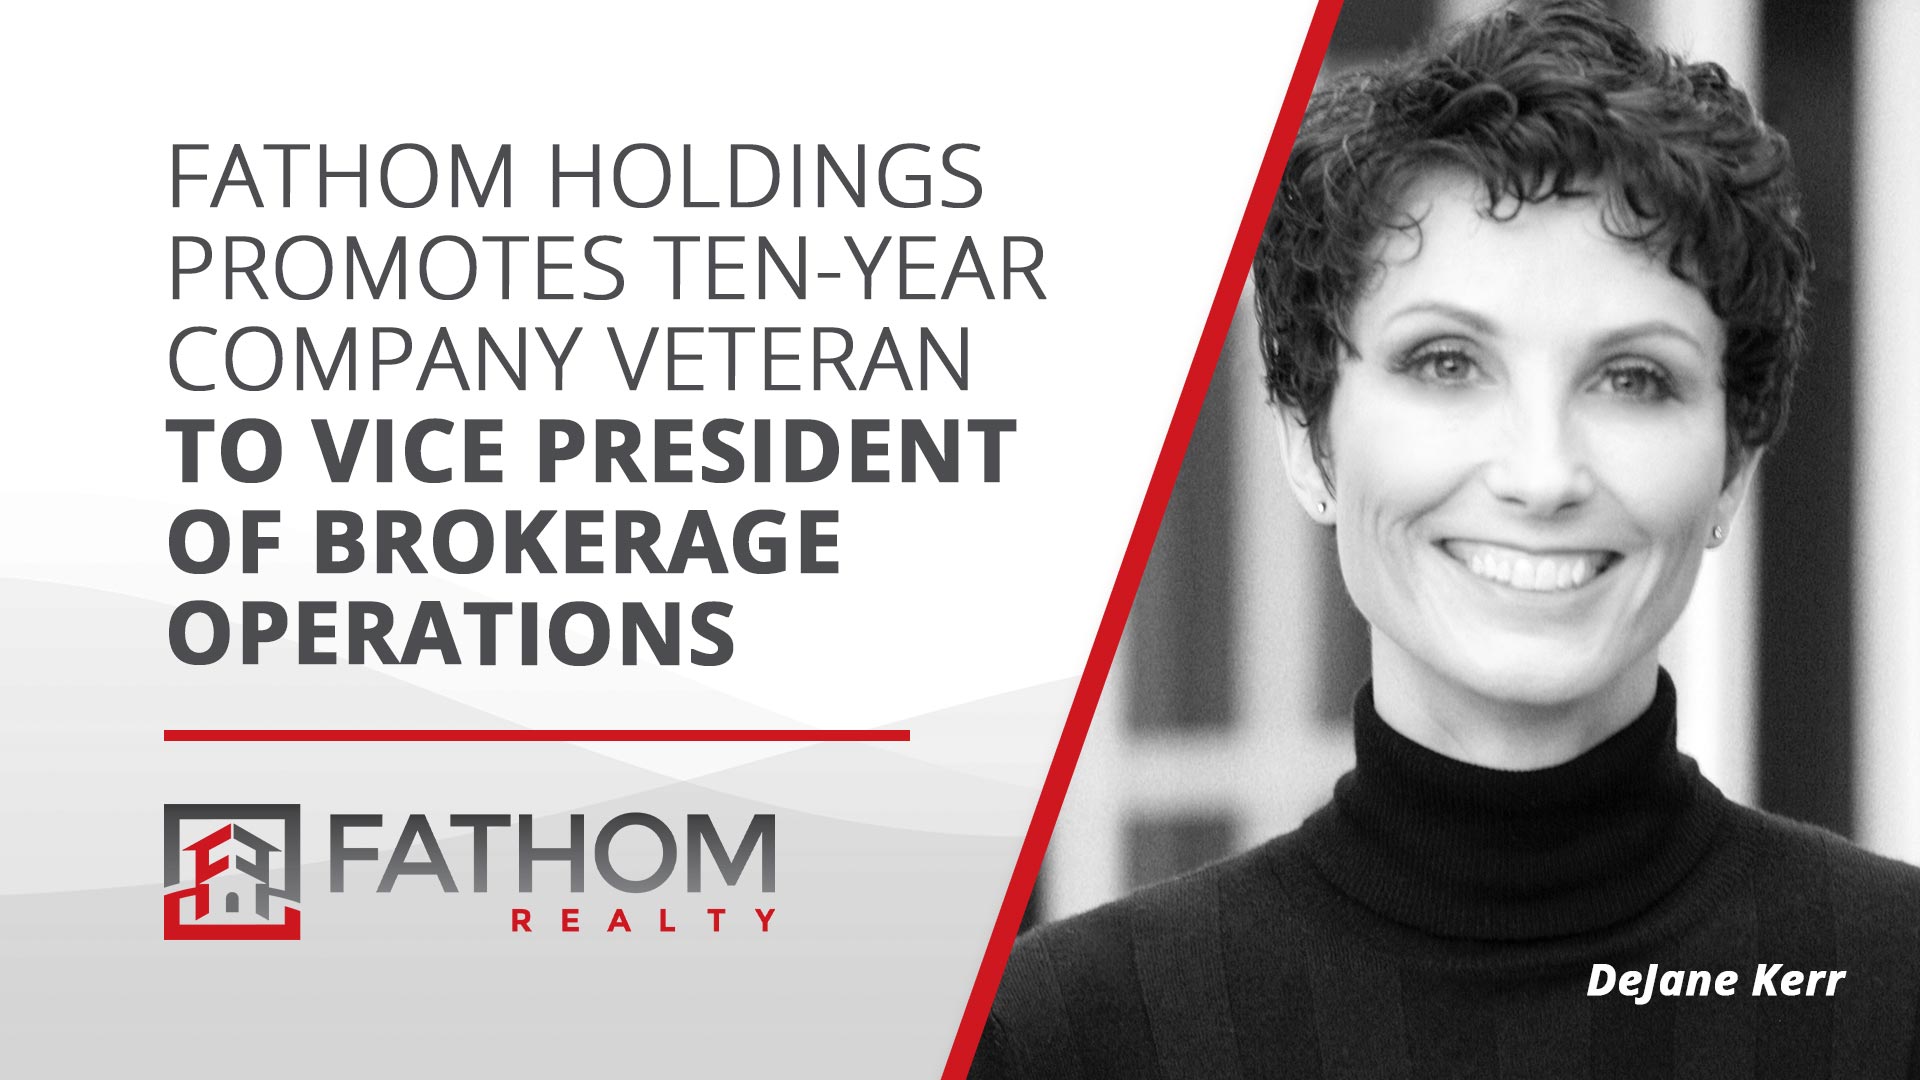 Featured image for “Fathom Holdings Promotes Ten-Year Company Veteran to Vice President of Brokerage Operations”